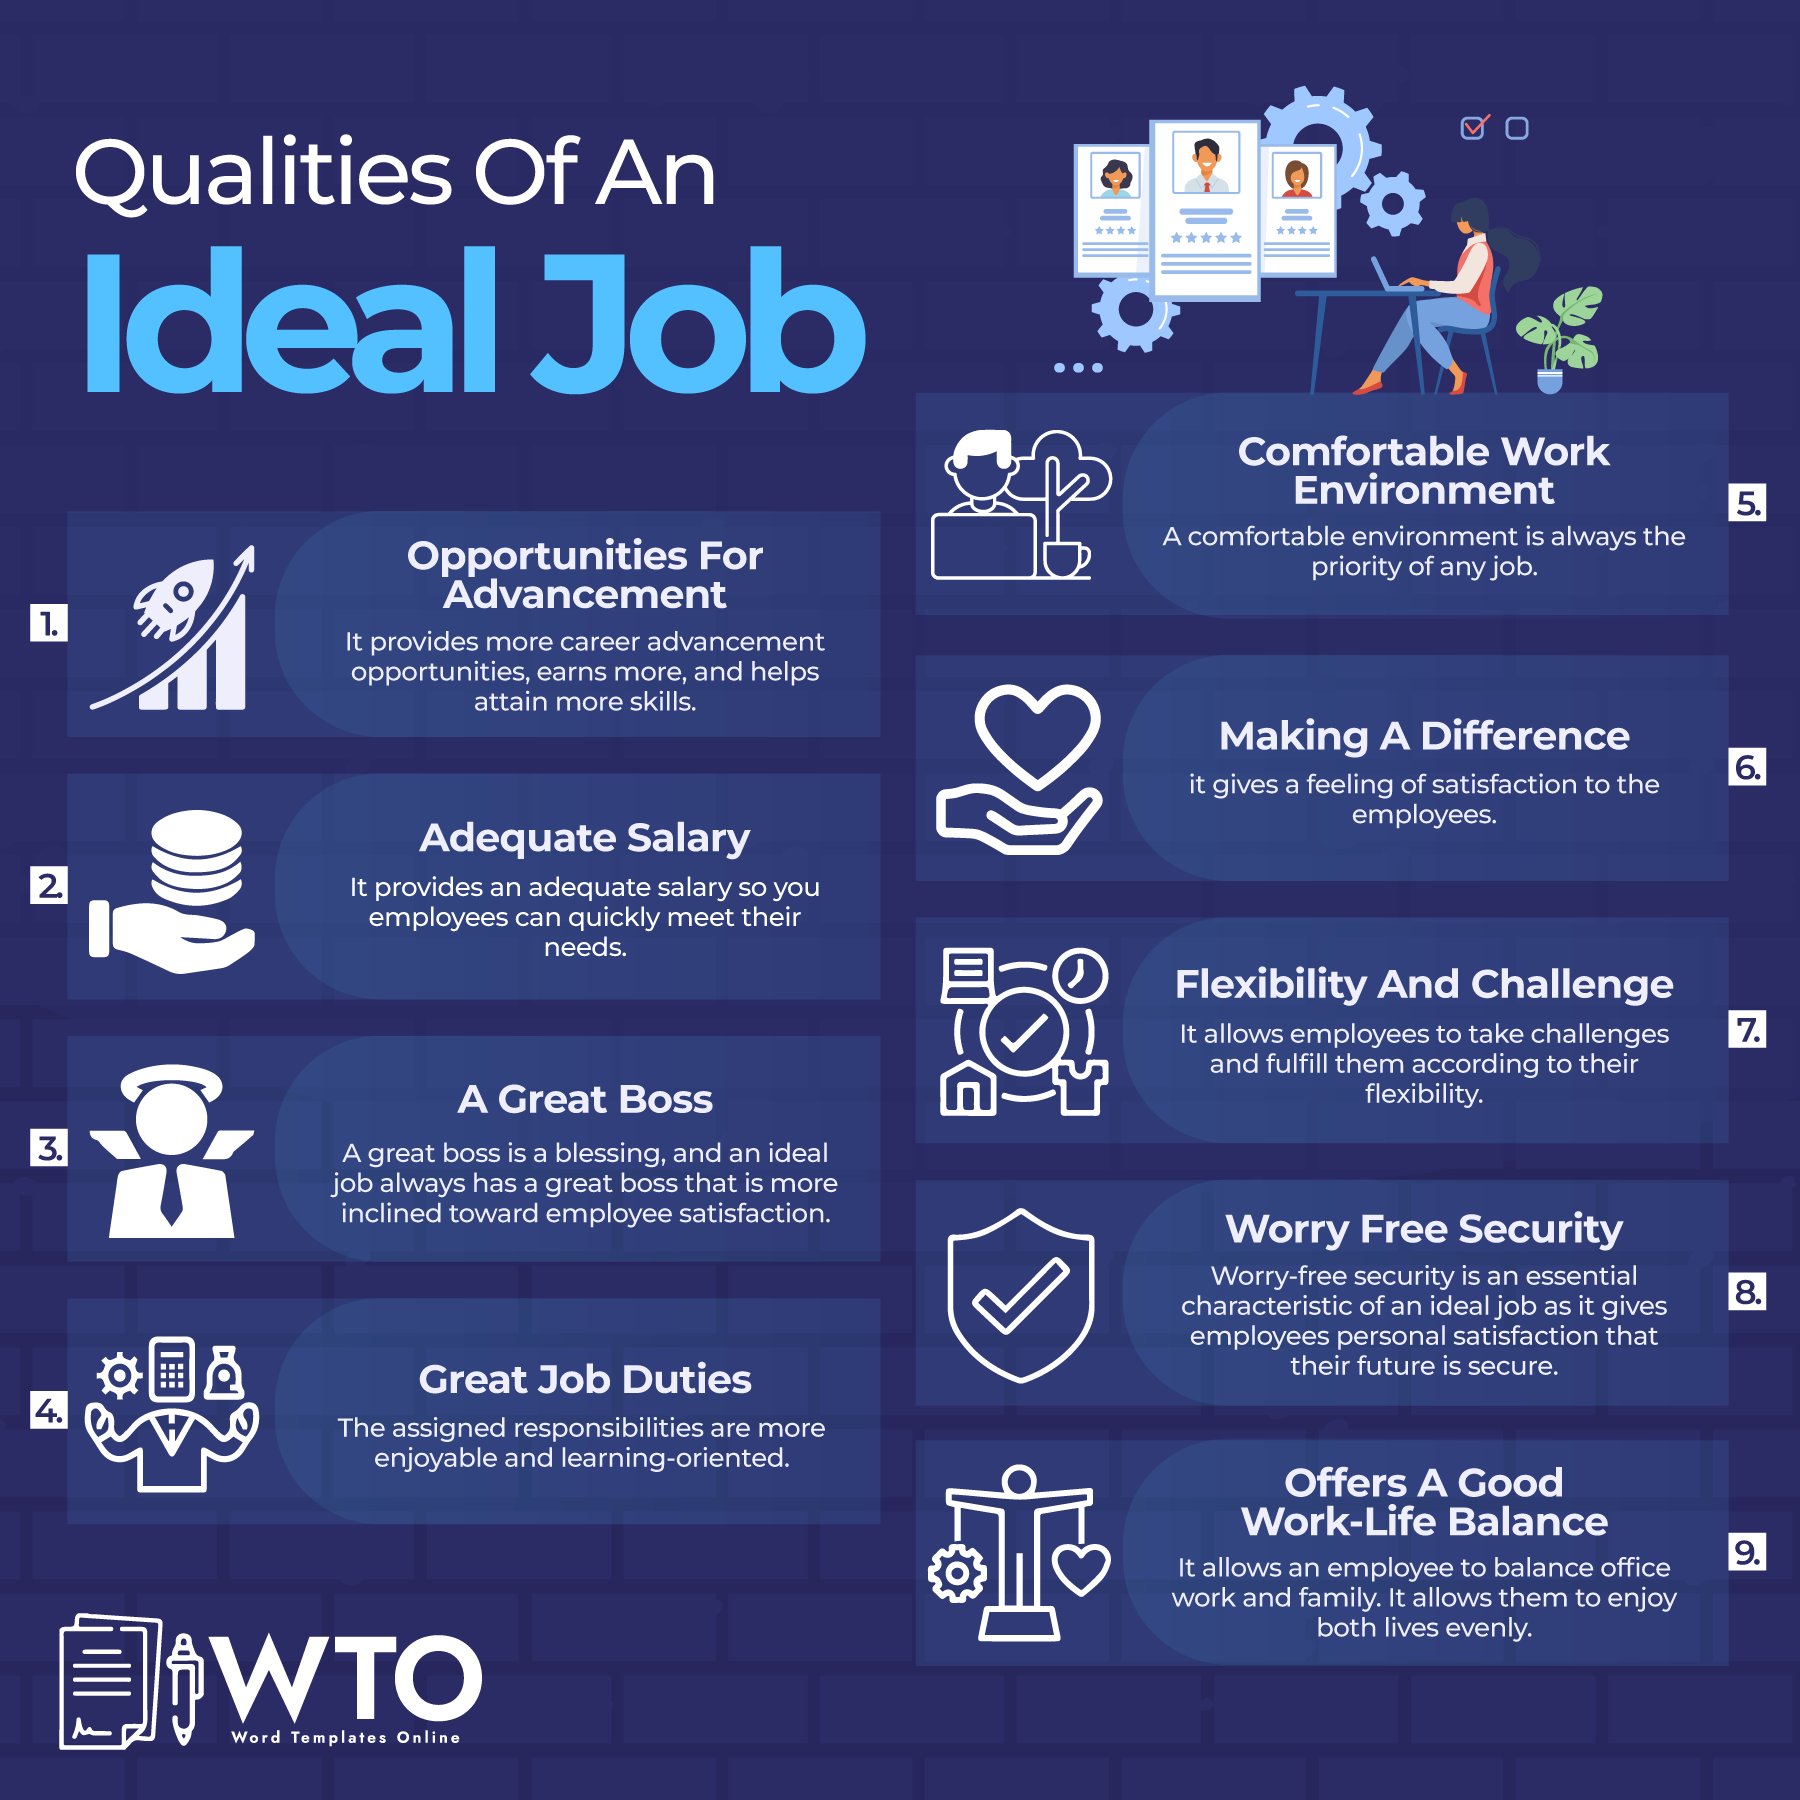 This infographic is about the Qualities of an Ideal Job.